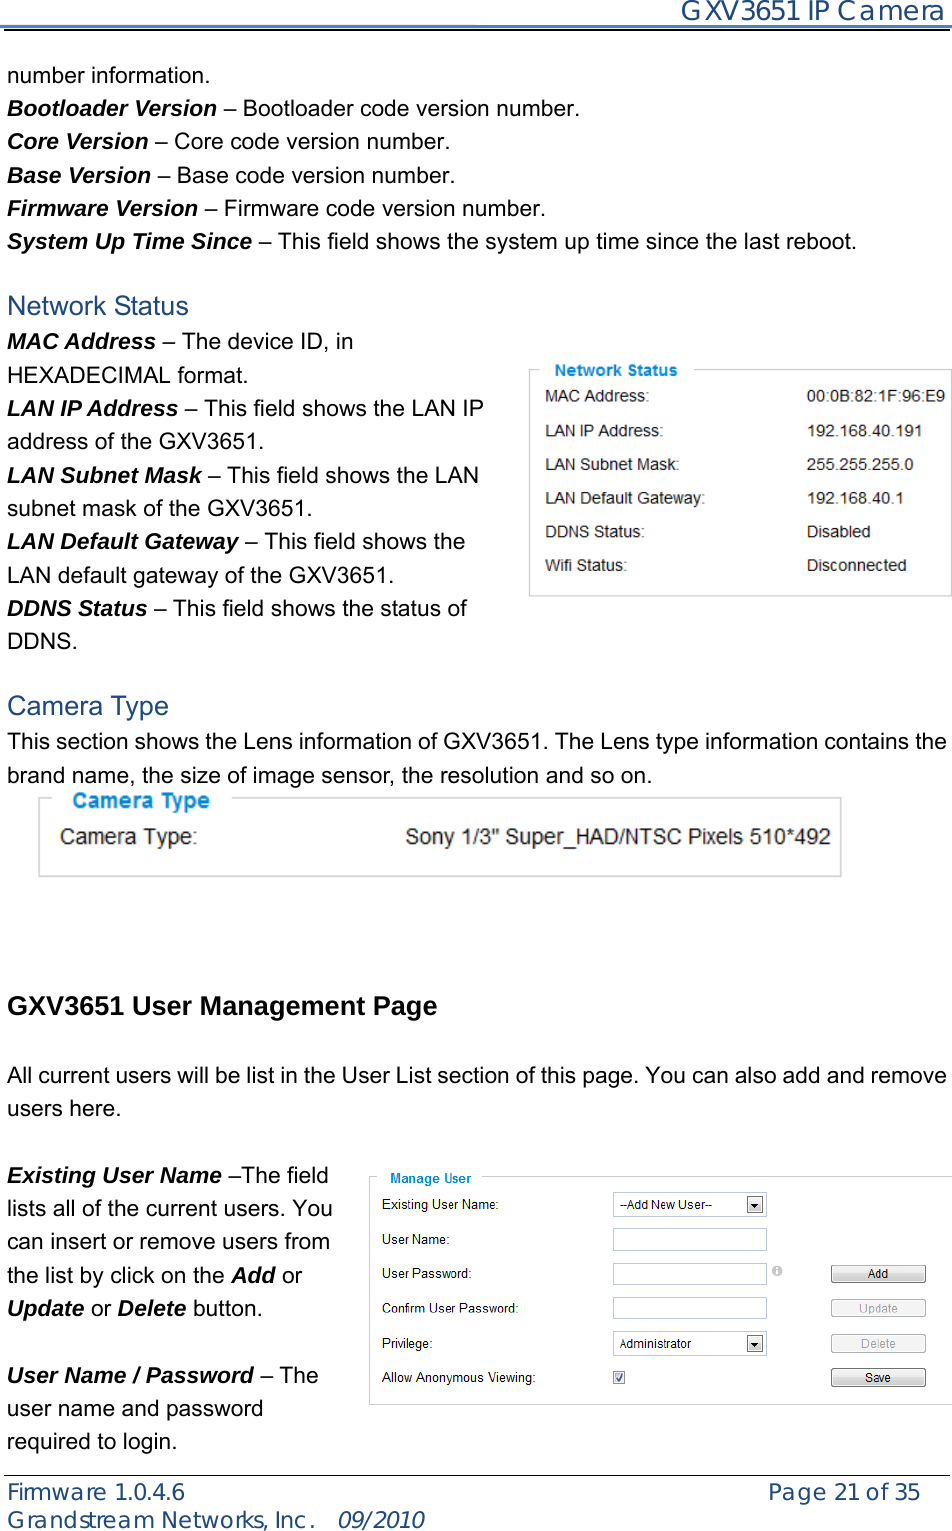     GXV3651 IP Camera Firmware 1.0.4.6                                                   Page 21 of 35    Grandstream Networks, Inc.  09/2010  number information. Bootloader Version – Bootloader code version number. Core Version – Core code version number. Base Version – Base code version number. Firmware Version – Firmware code version number. System Up Time Since – This field shows the system up time since the last reboot.  Network Status MAC Address – The device ID, in HEXADECIMAL format. LAN IP Address – This field shows the LAN IP address of the GXV3651. LAN Subnet Mask – This field shows the LAN subnet mask of the GXV3651. LAN Default Gateway – This field shows the LAN default gateway of the GXV3651. DDNS Status – This field shows the status of DDNS.  Camera Type This section shows the Lens information of GXV3651. The Lens type information contains the brand name, the size of image sensor, the resolution and so on.       GXV3651 User Management Page  All current users will be list in the User List section of this page. You can also add and remove users here.    Existing User Name –The field lists all of the current users. You can insert or remove users from the list by click on the Add or Update or Delete button.    User Name / Password – The user name and password required to login. 